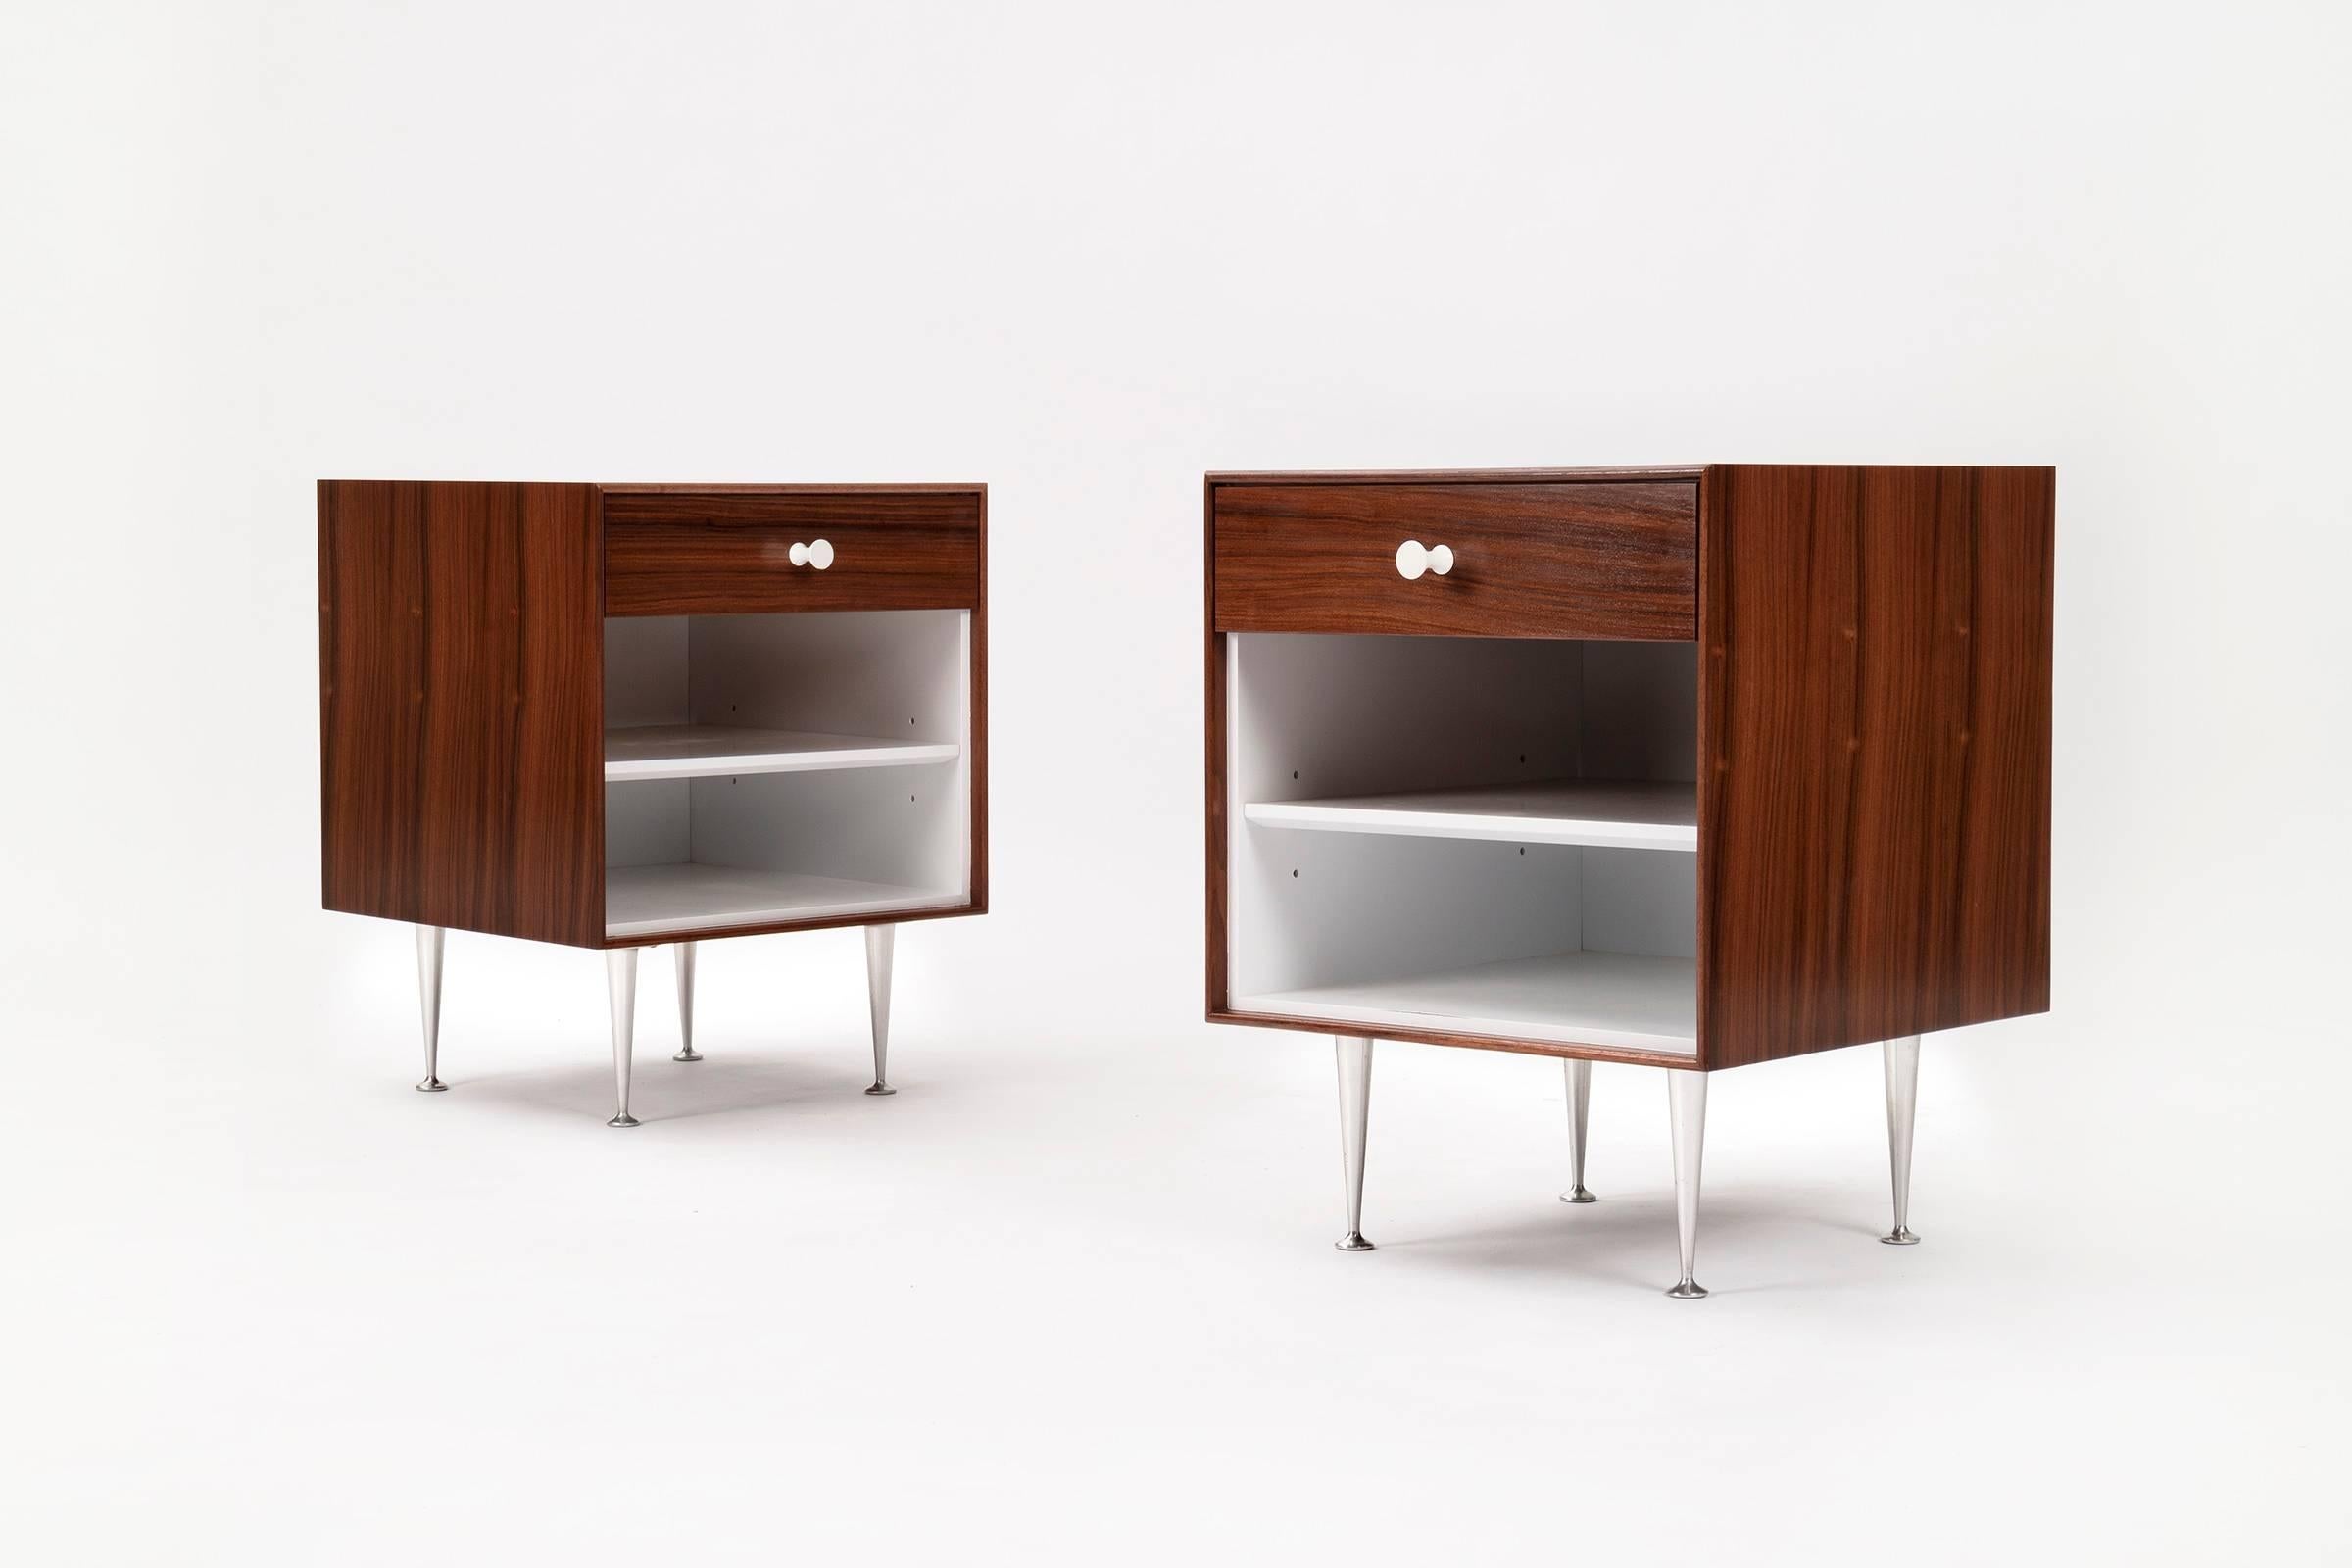 Nelson for Herman Miller thin-edged  rosewood  nightstands.
Features porcelain knobs and tapered spun aluminium legs.